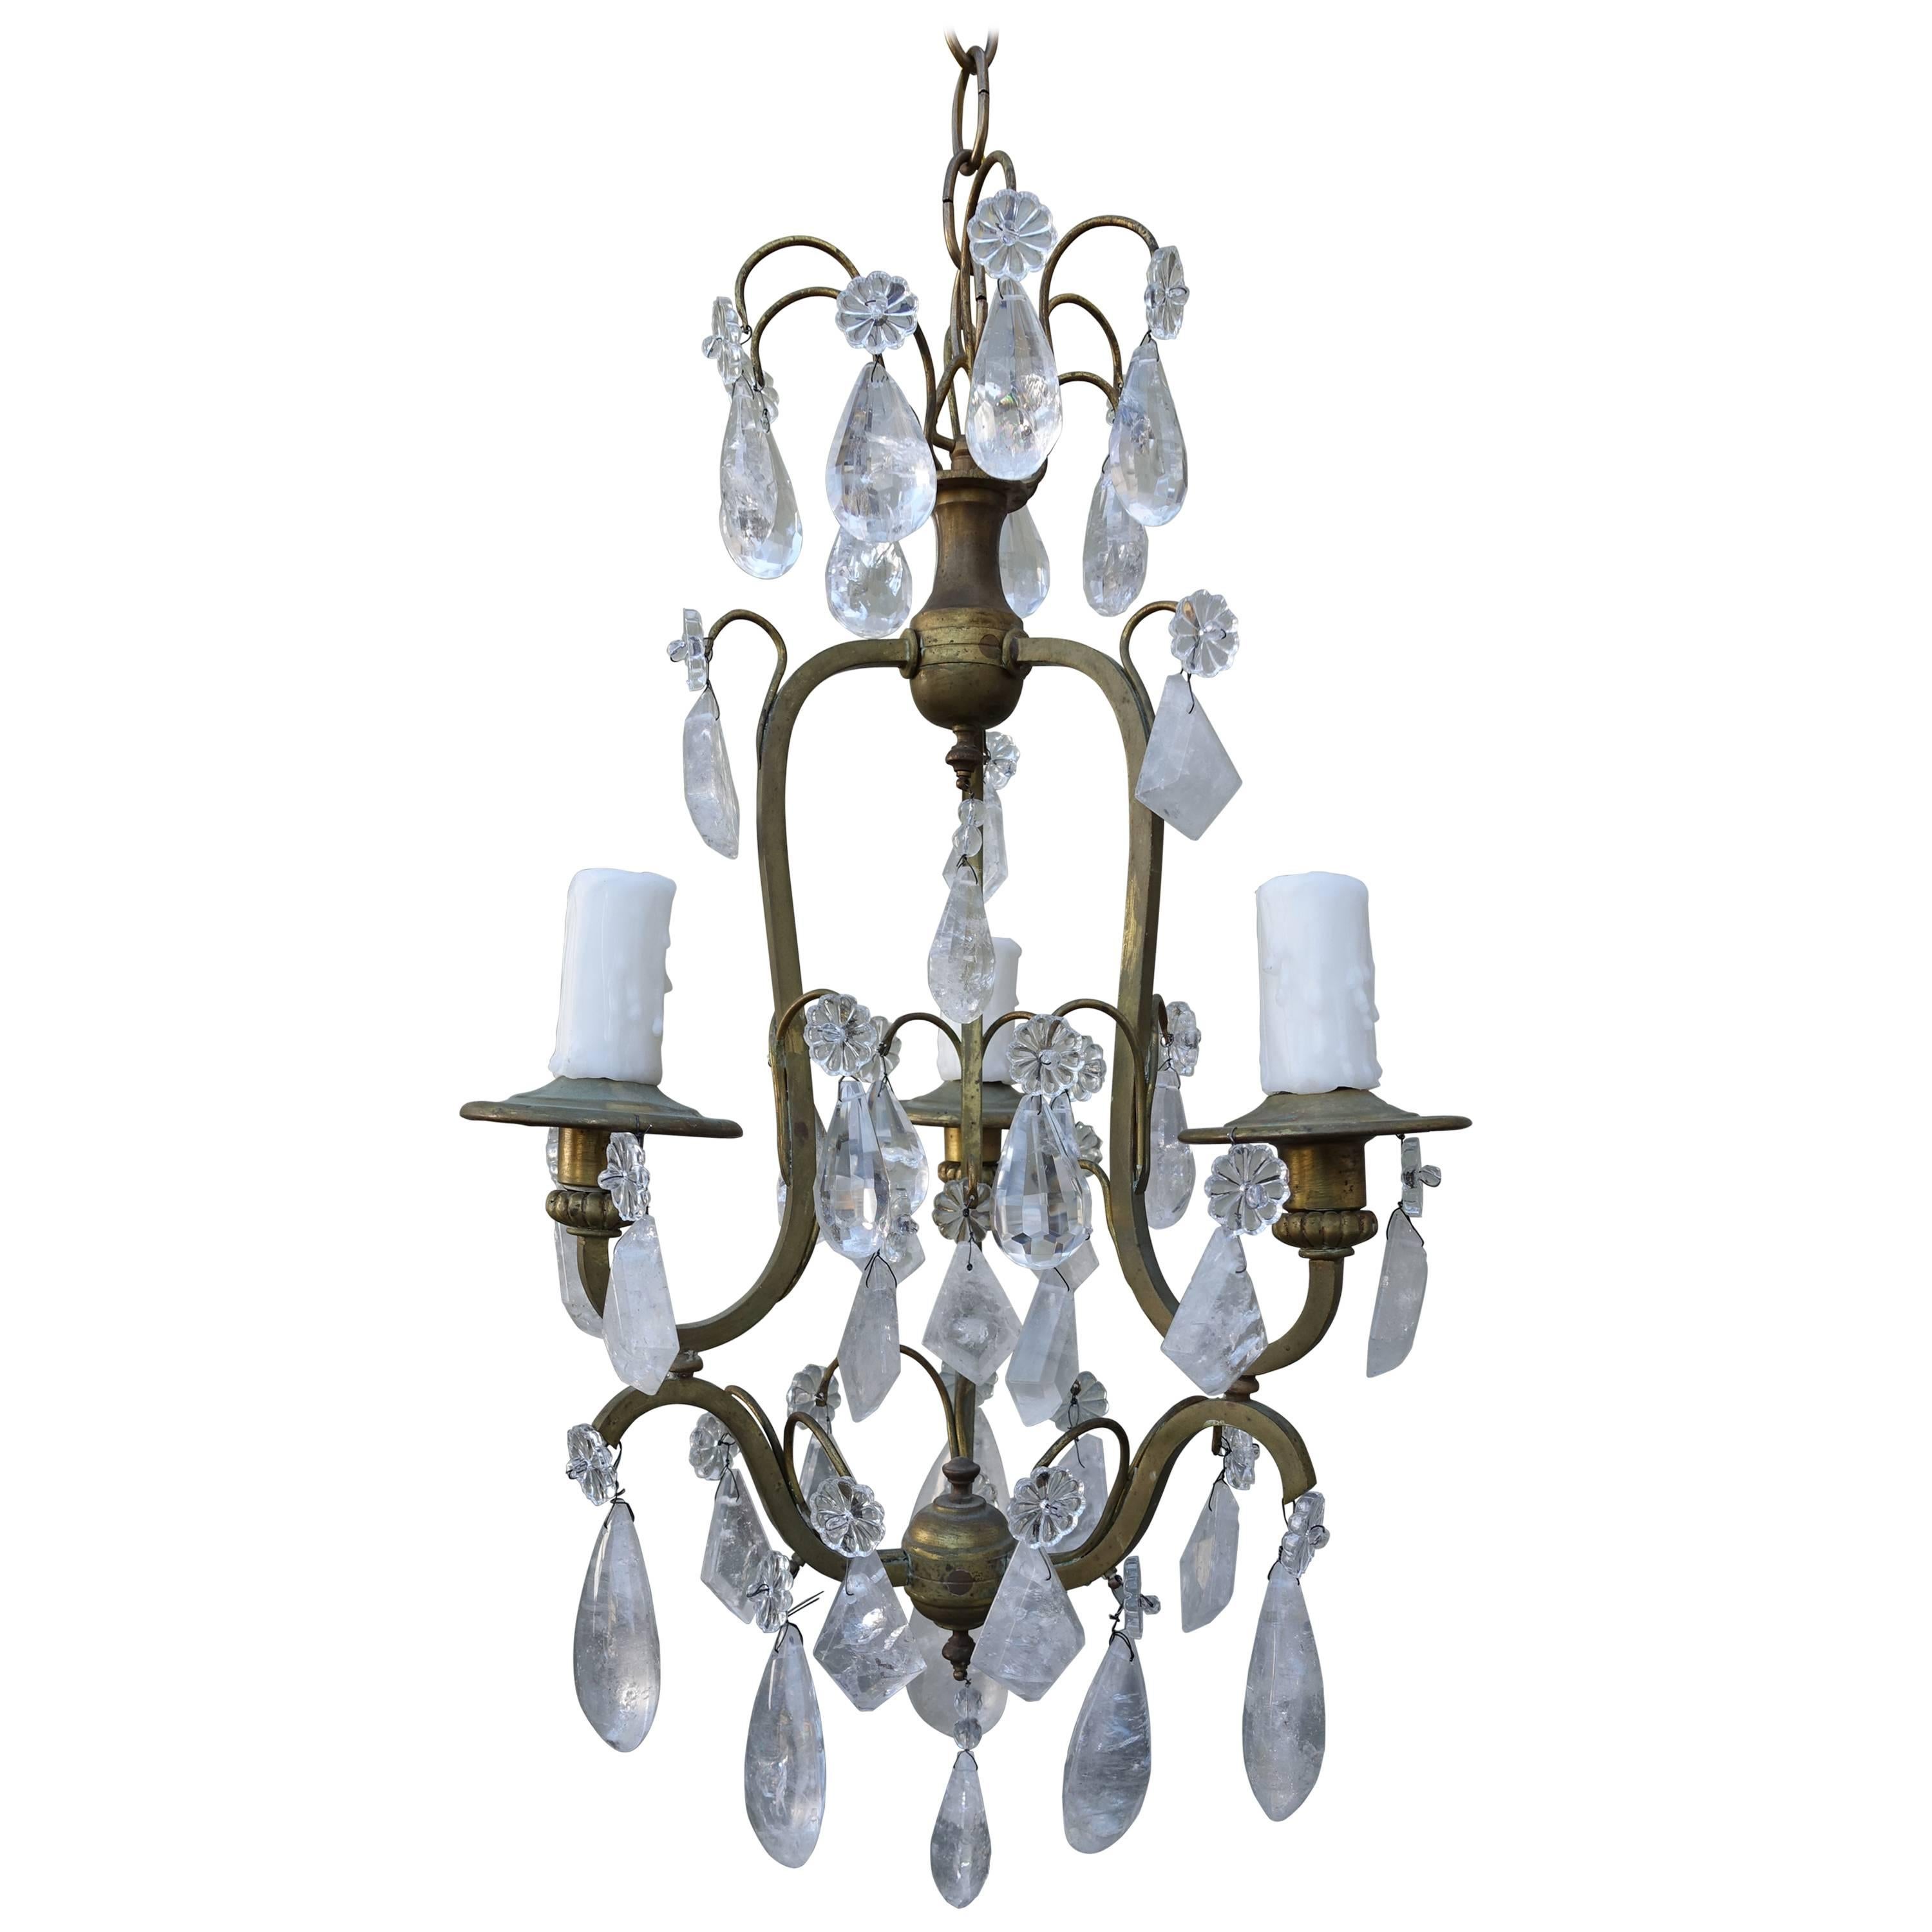 French Three-Light Rock Crystal Chandelier